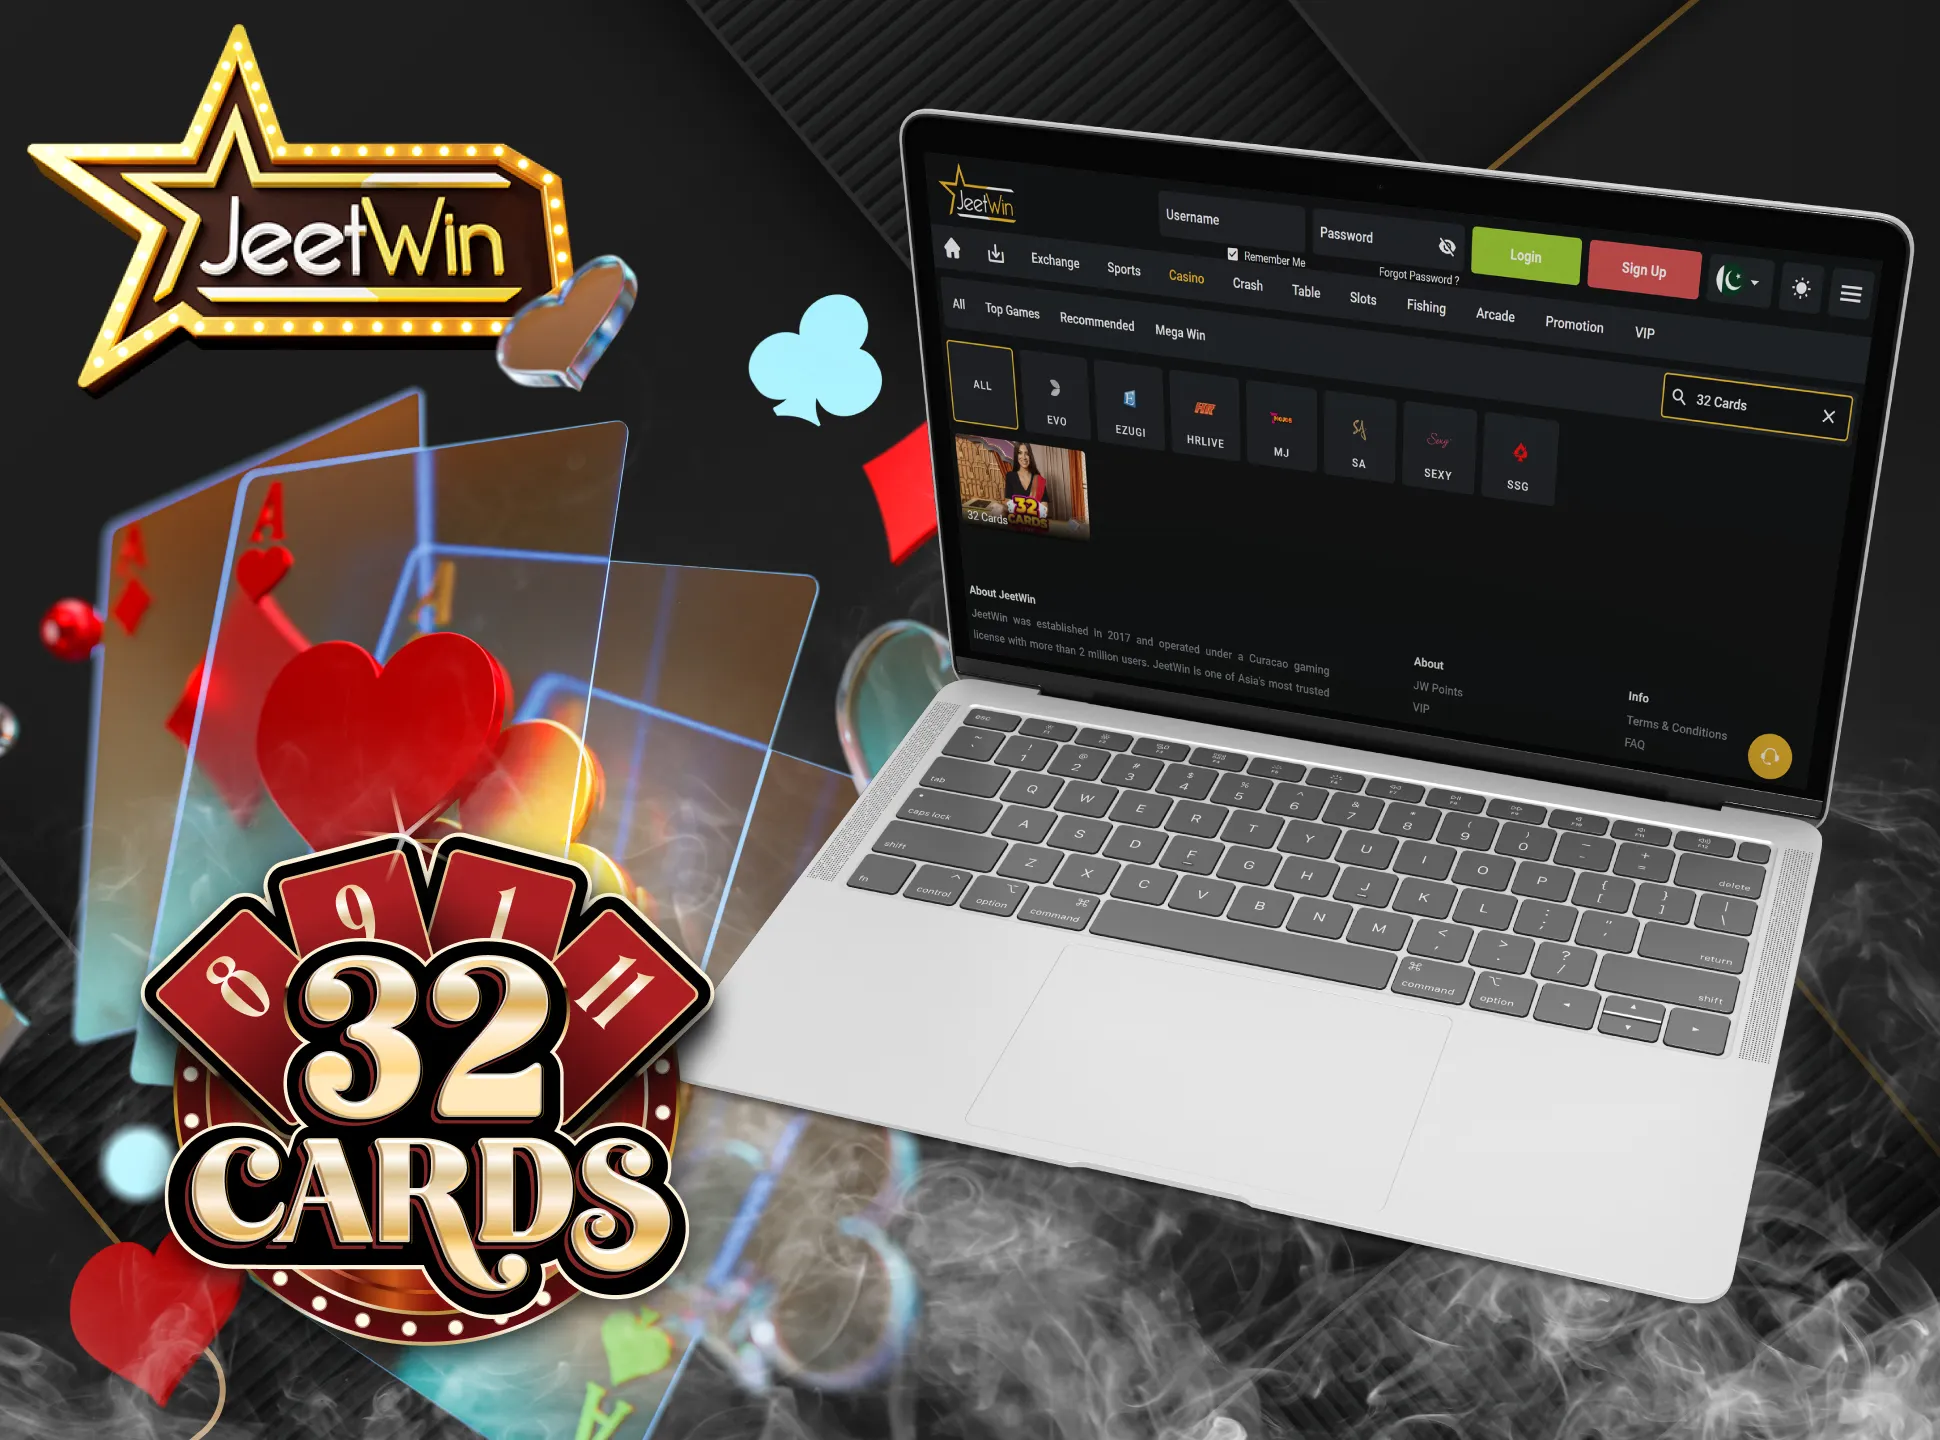 Enjoy 32 cards game on JeetWin website.